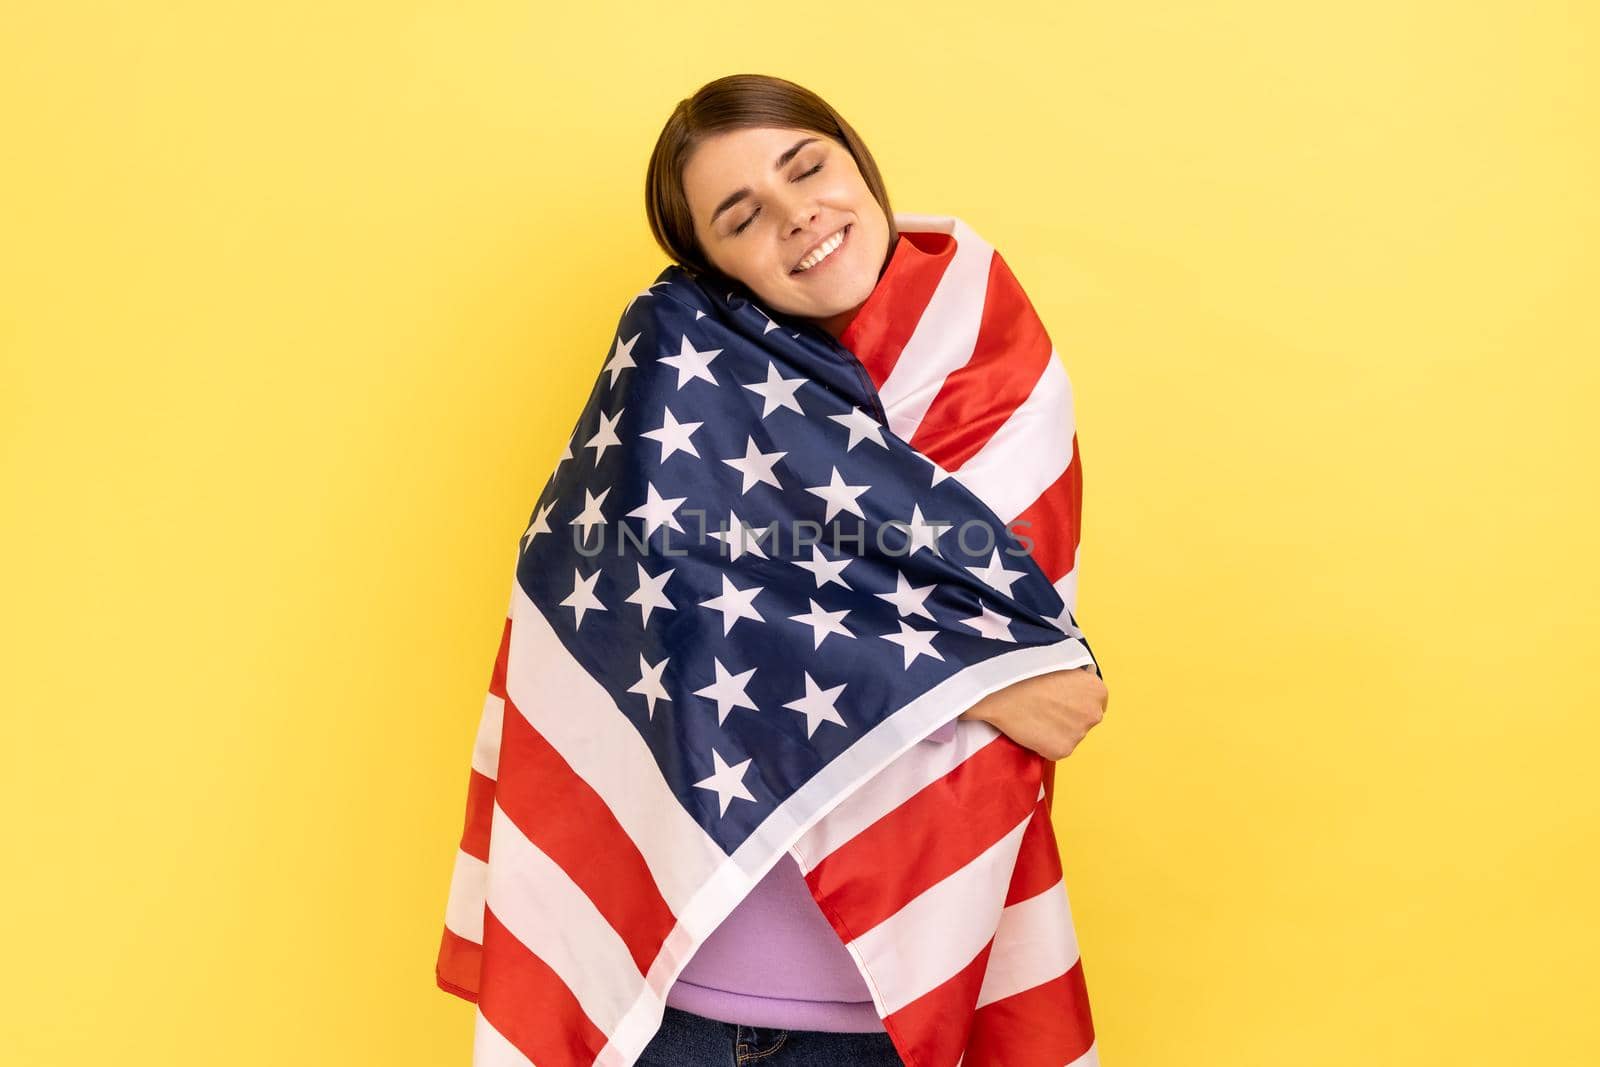 Portrait of kind friendly attractive woman standing wrapped in american flag, looking at camera with pleasant smile, wearing purple hoodie. Indoor studio shot isolated on yellow background.